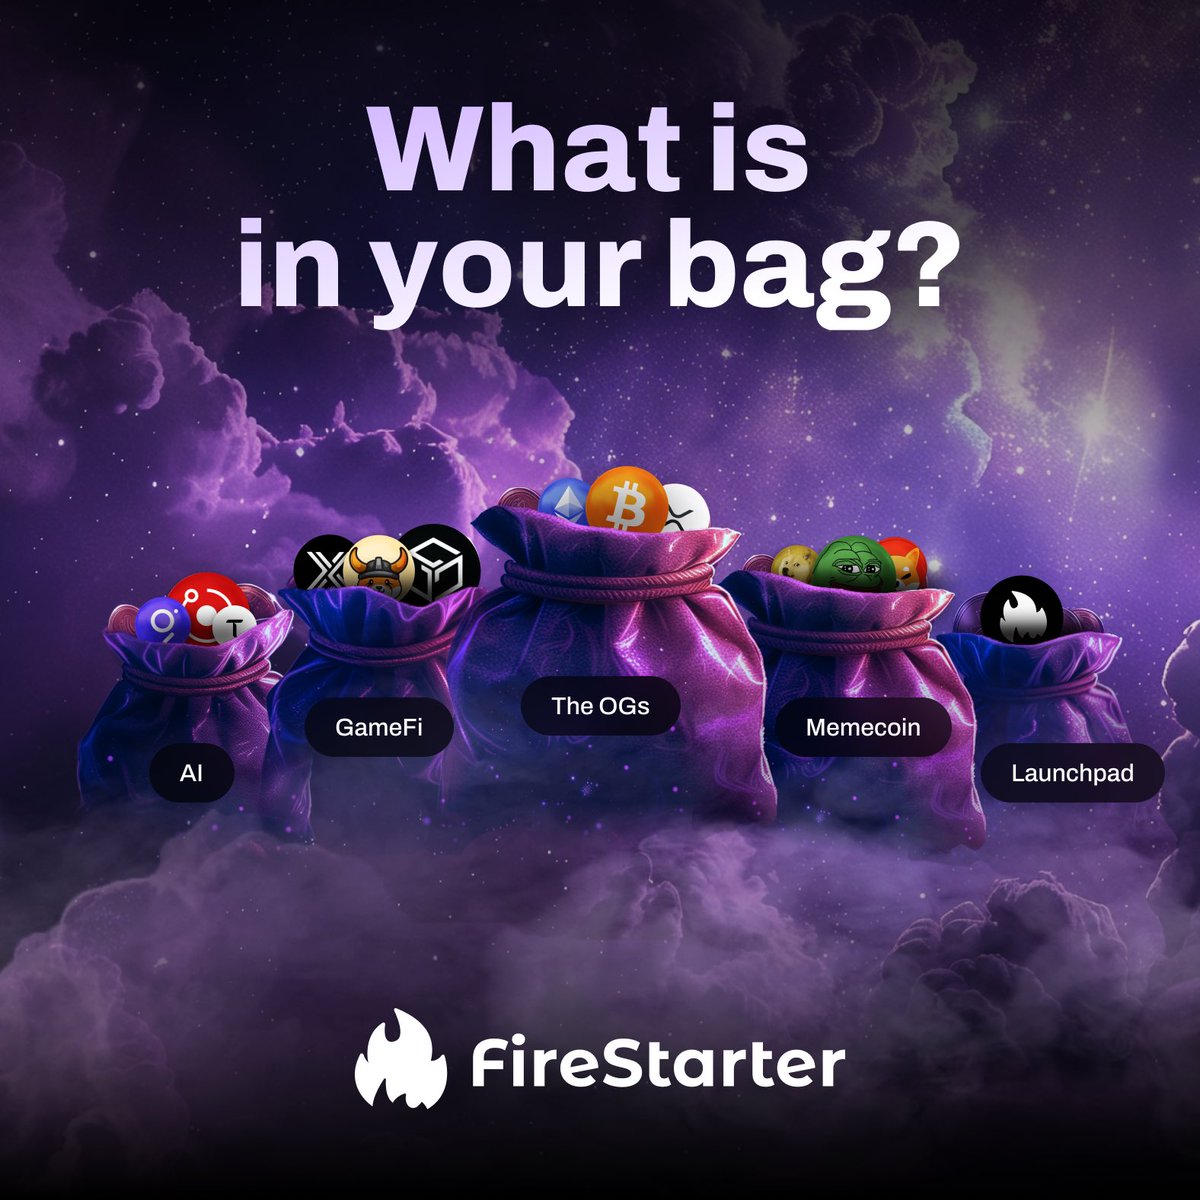 Time for a bag check 🎒🤩

What's powering your journey❓Vote now👇

Let's see what fuels your hustle 🔥

#WhatsInYourBag #Crypto #Tech